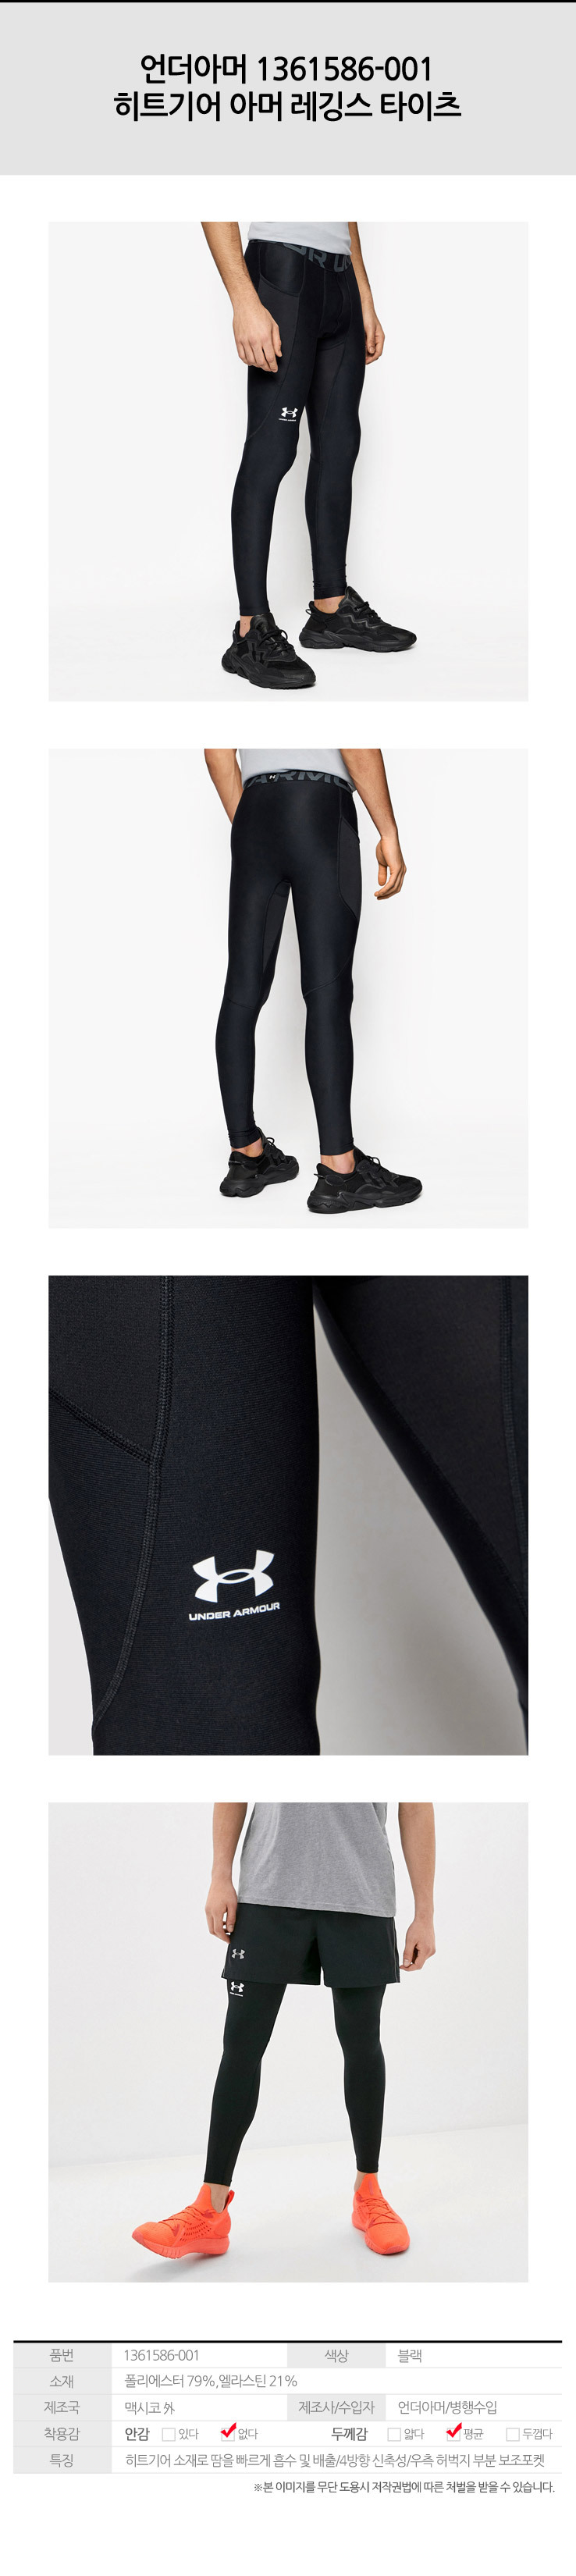 Gmarket - [Nike]Official Product/Sweatsuits/Pants/Collection